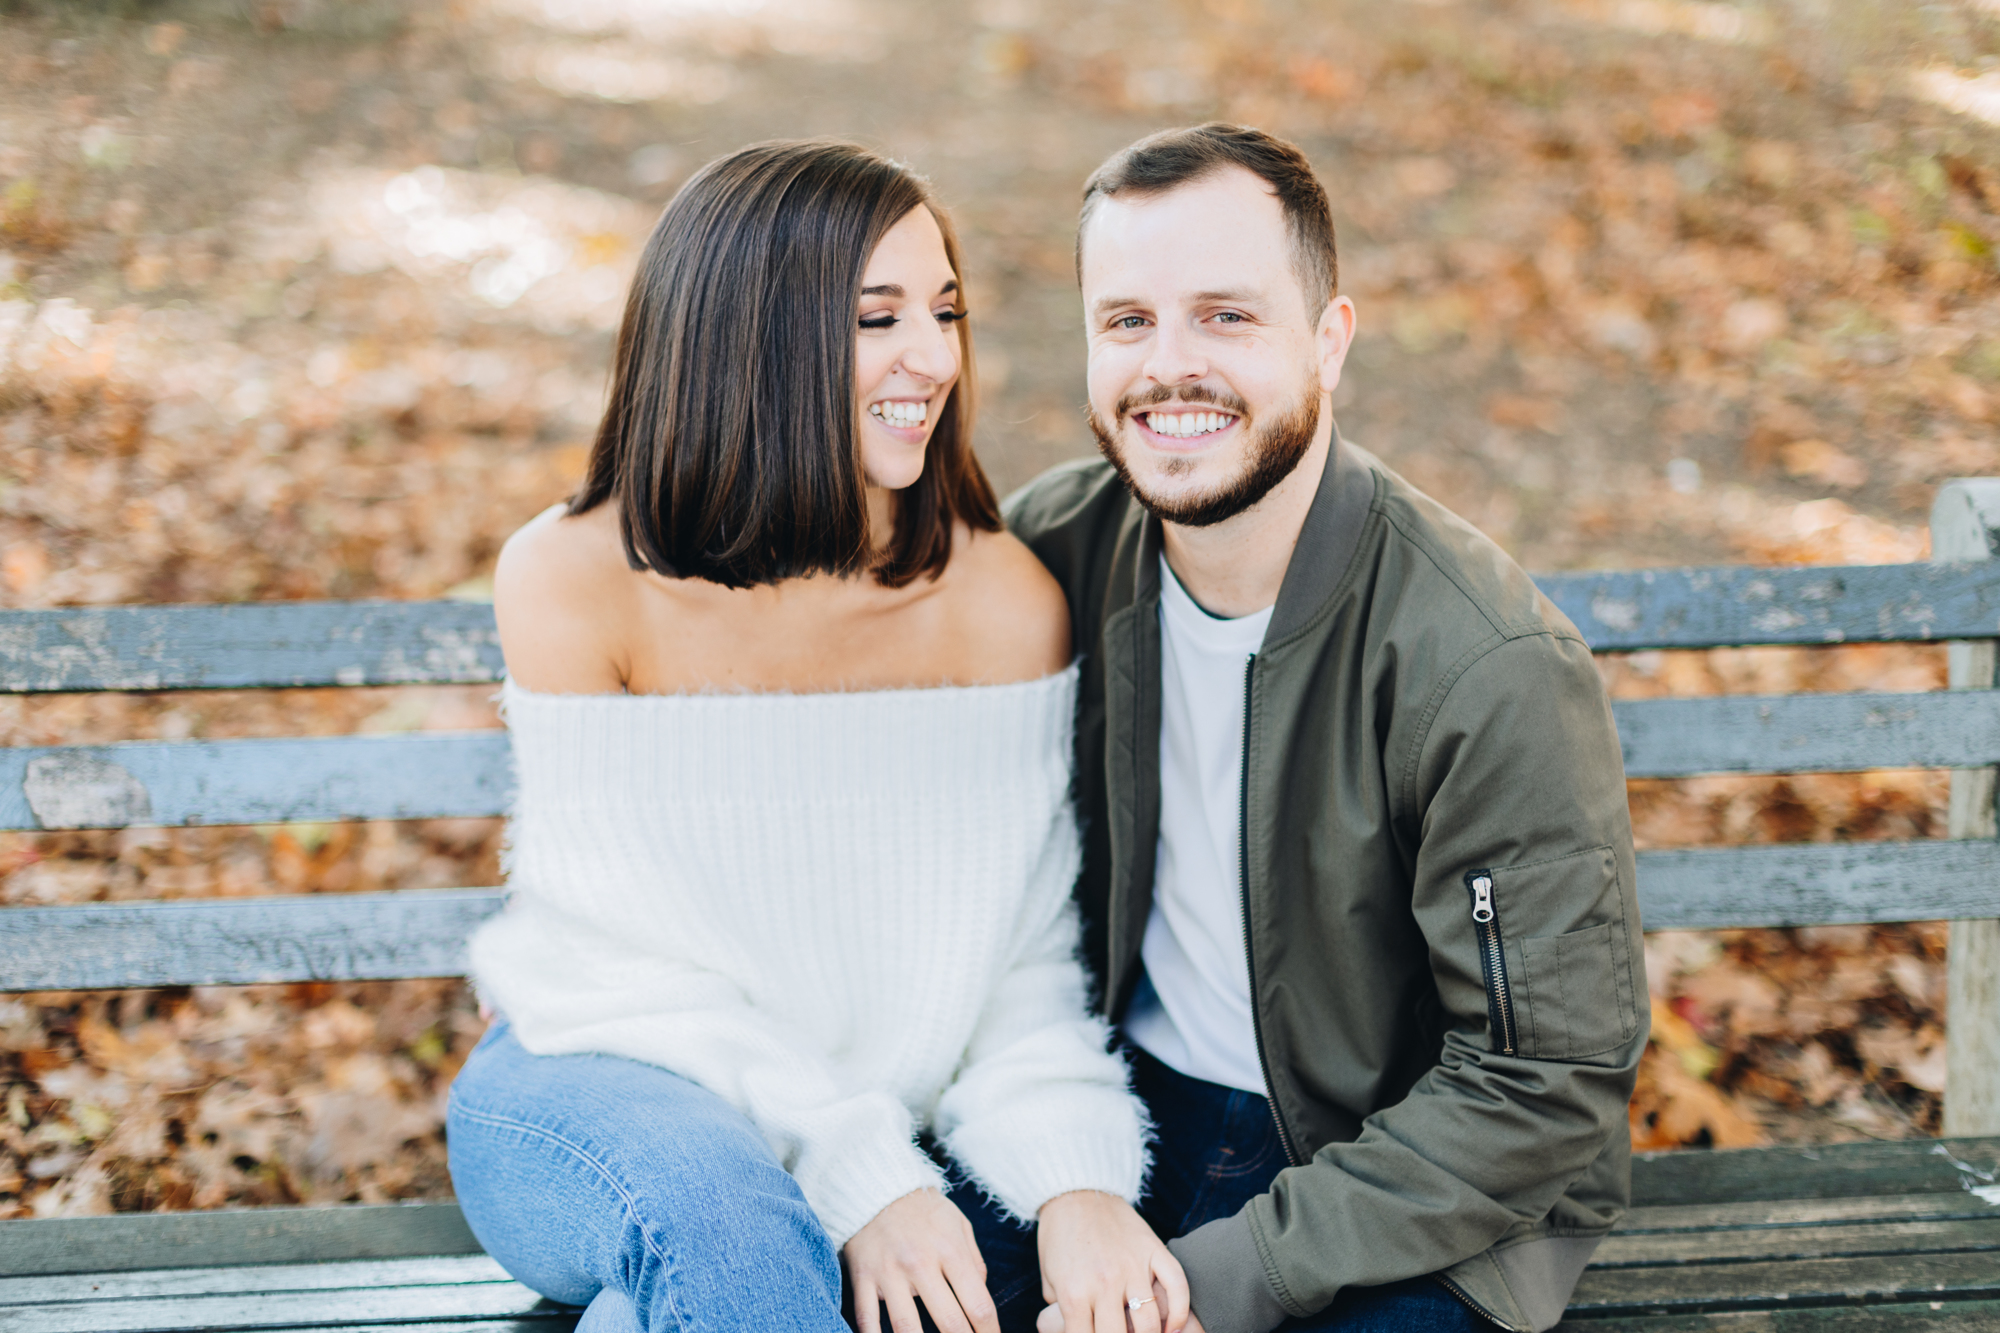 Aesthetic Fall Engagement Photos in Astoria Park, Queens, New York